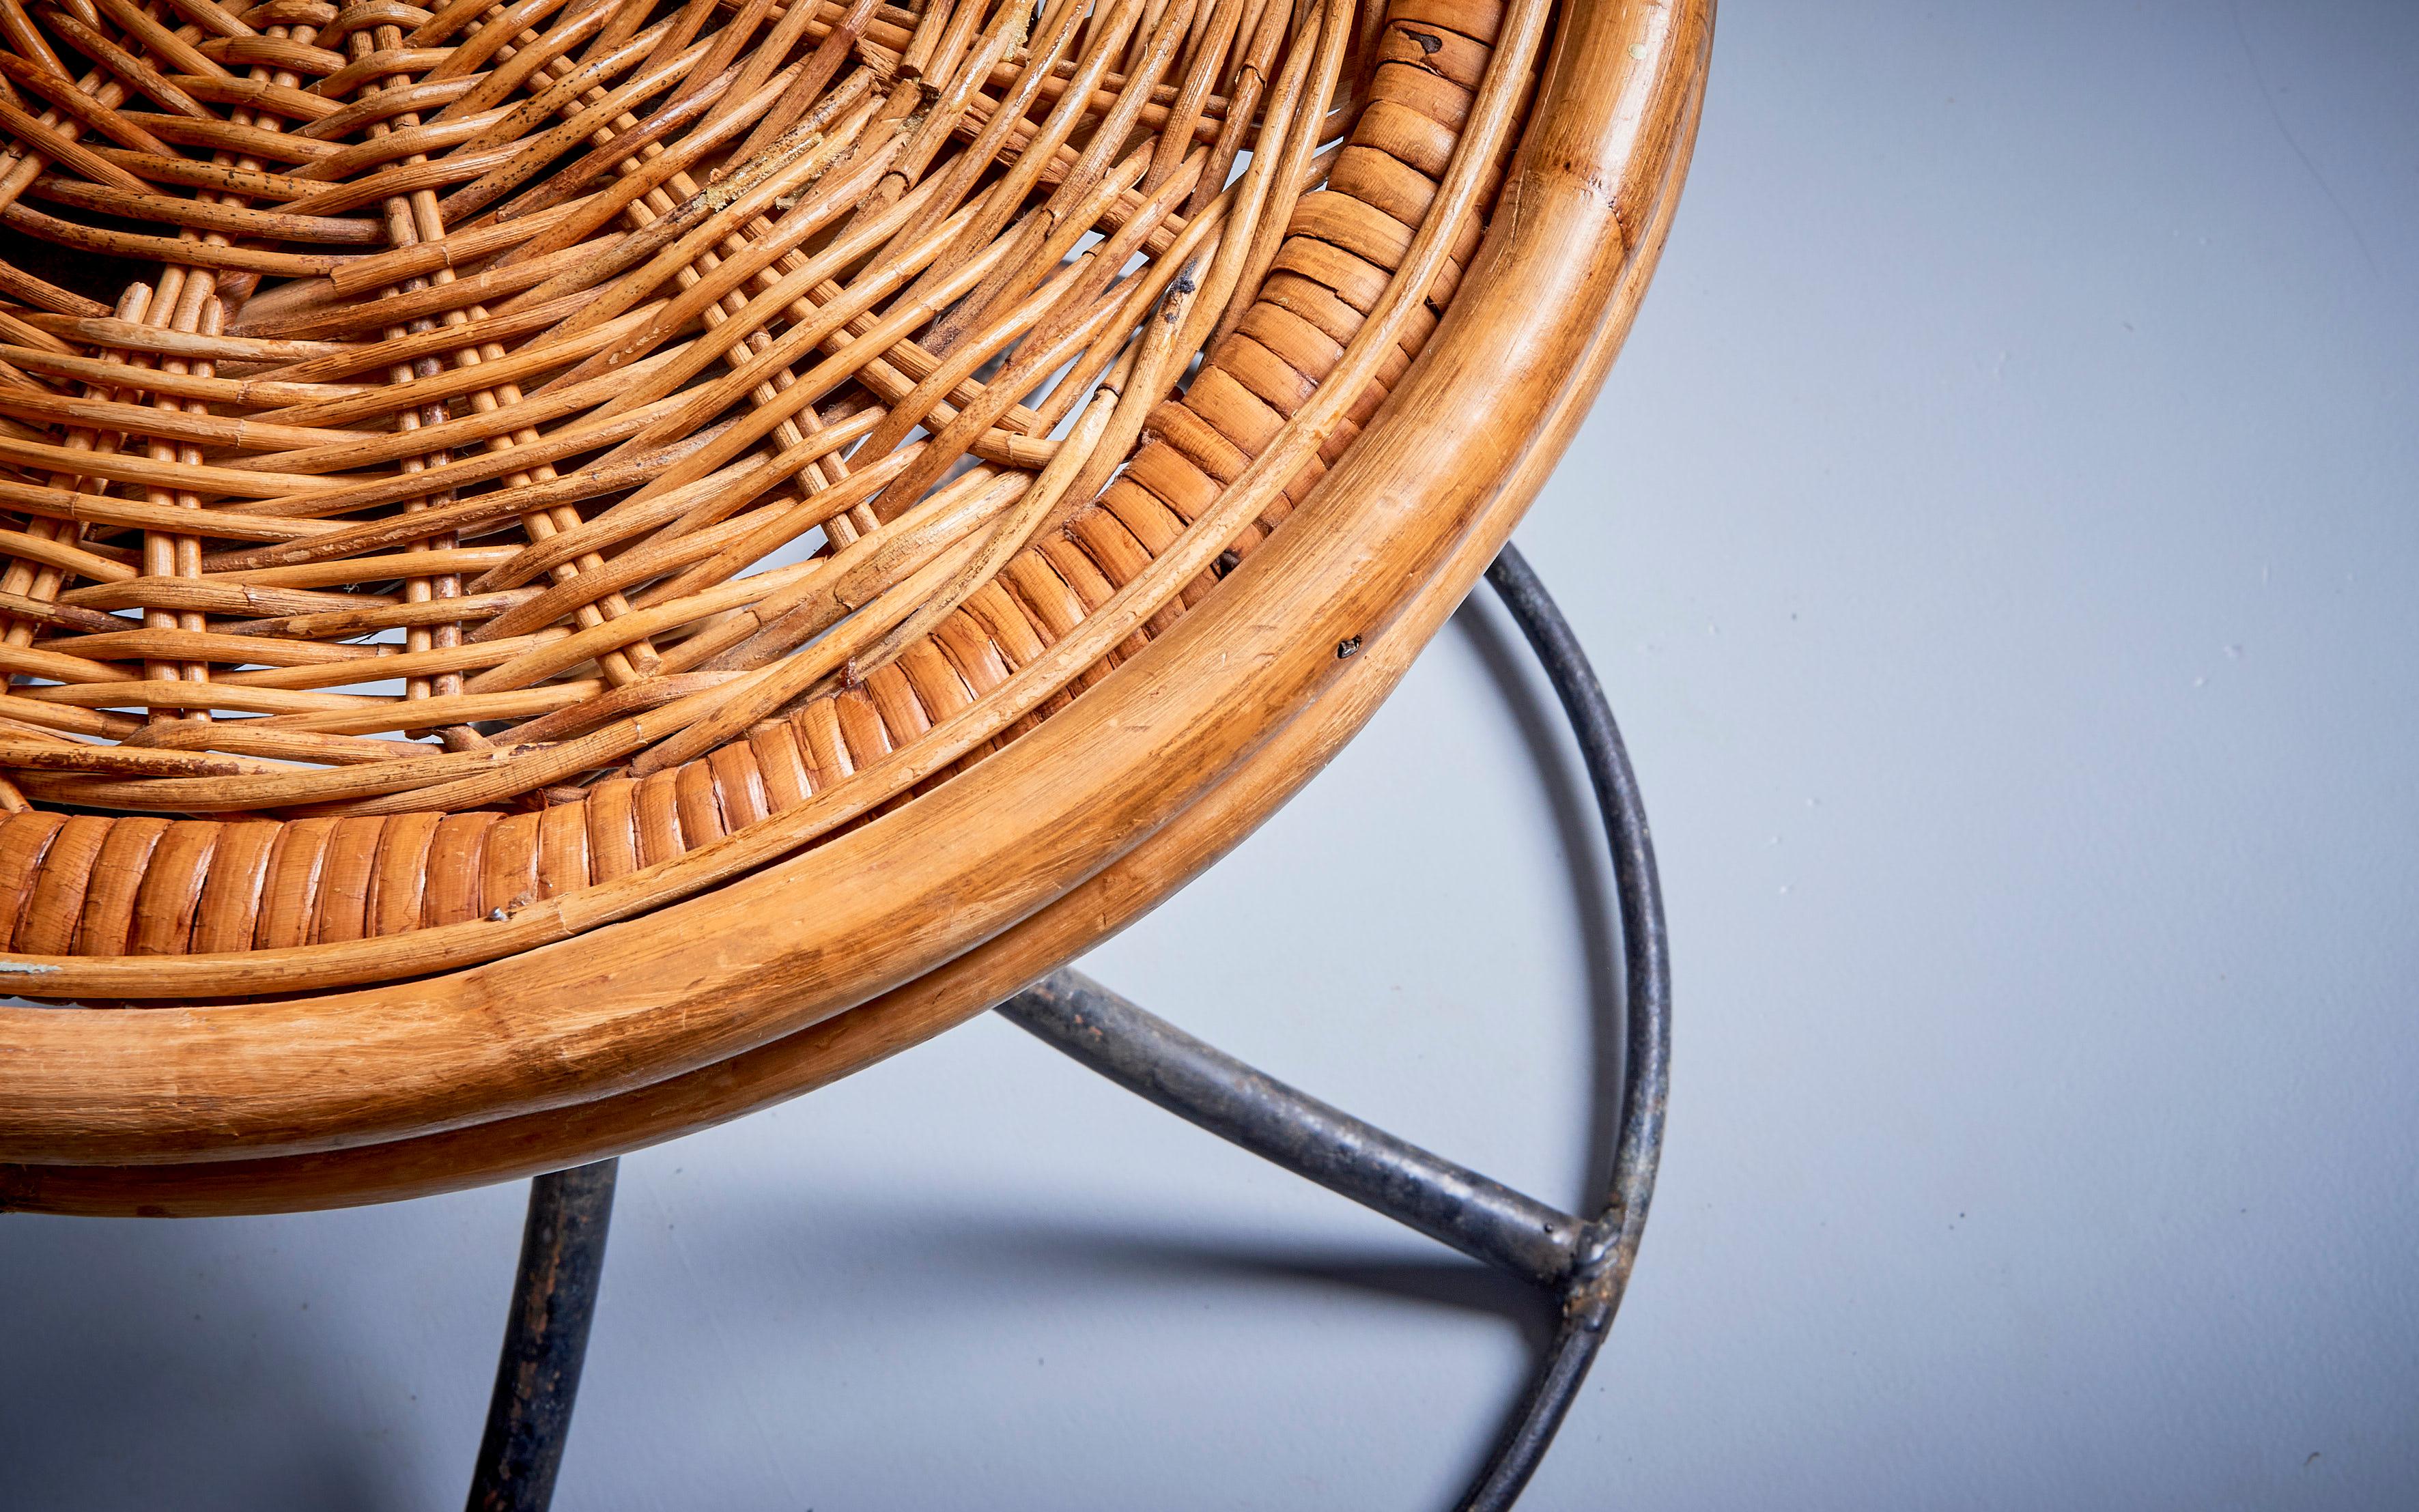 Mid-Century Modern Danny Ho Fong stool in metal and wicker, USA - 1960s  For Sale